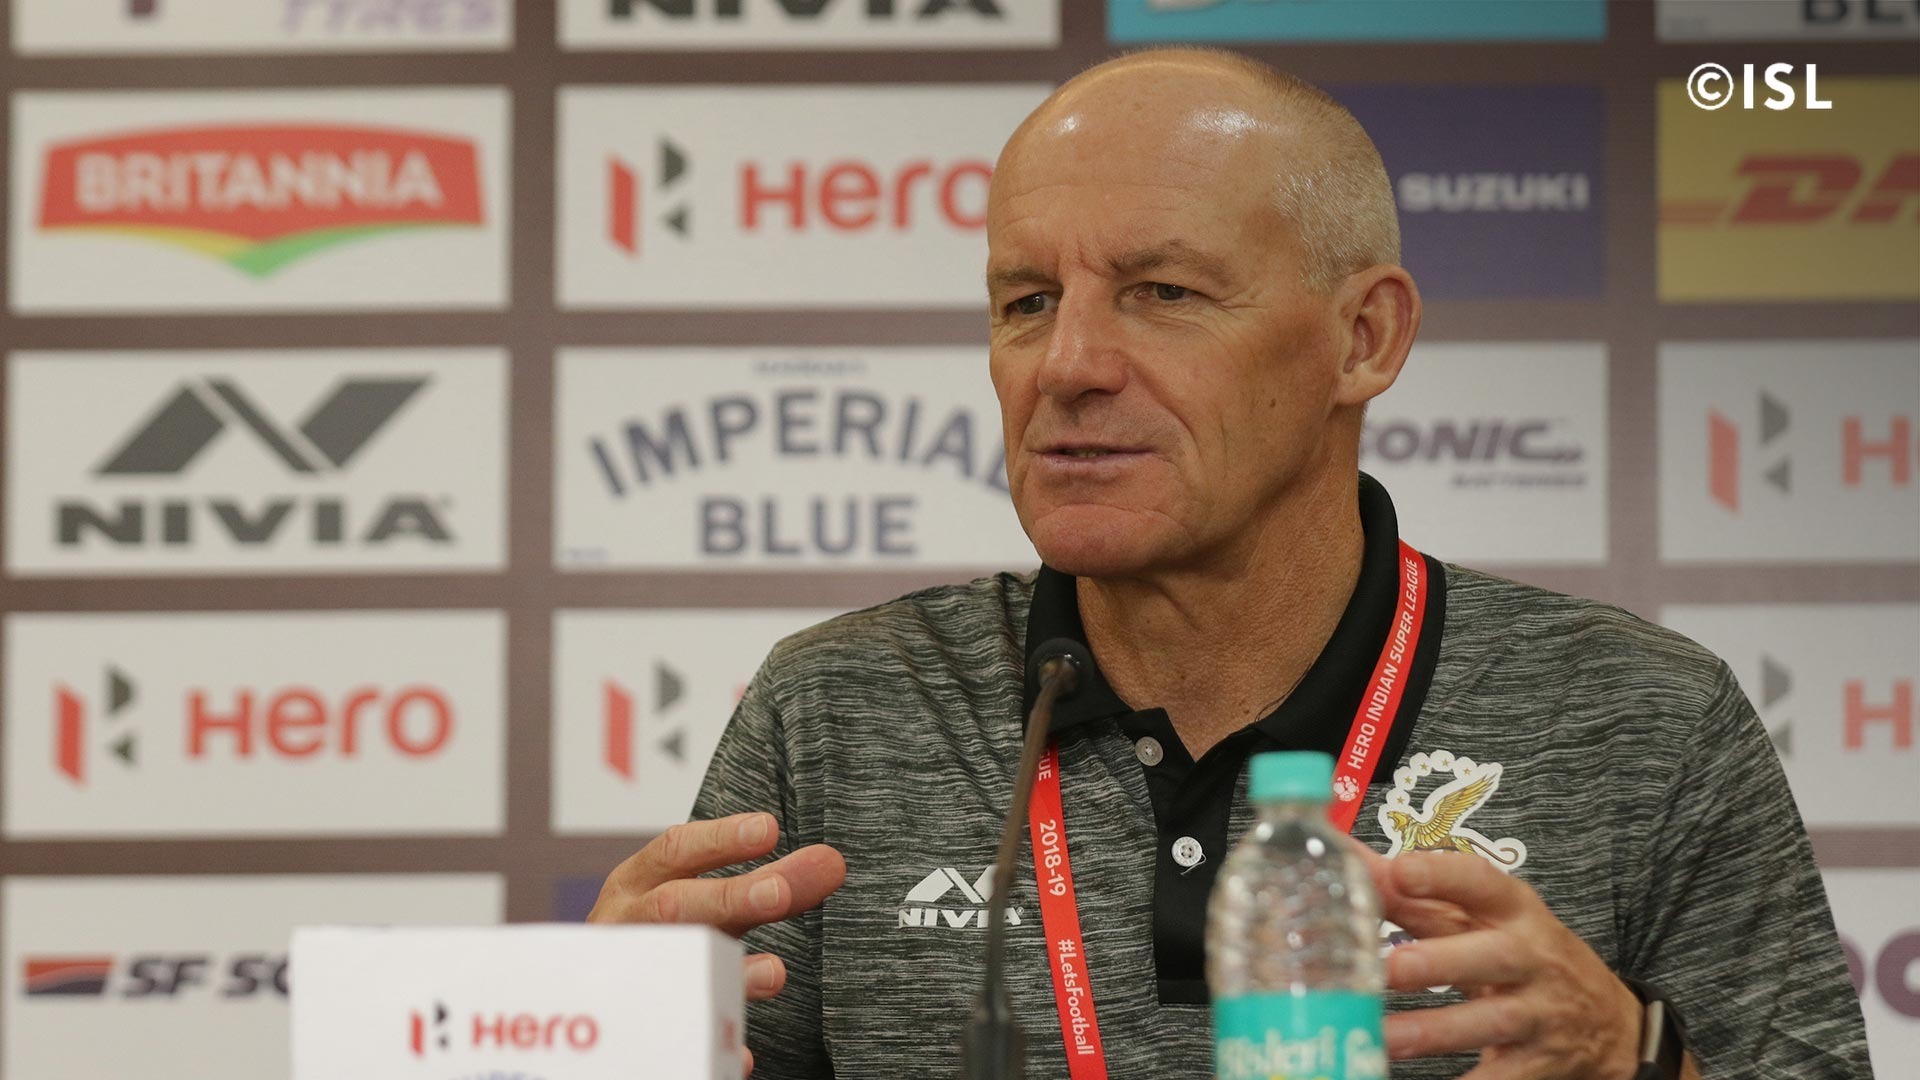 ISL 2018 | Steve Coppell praises ATK’s persistence in game against Pune